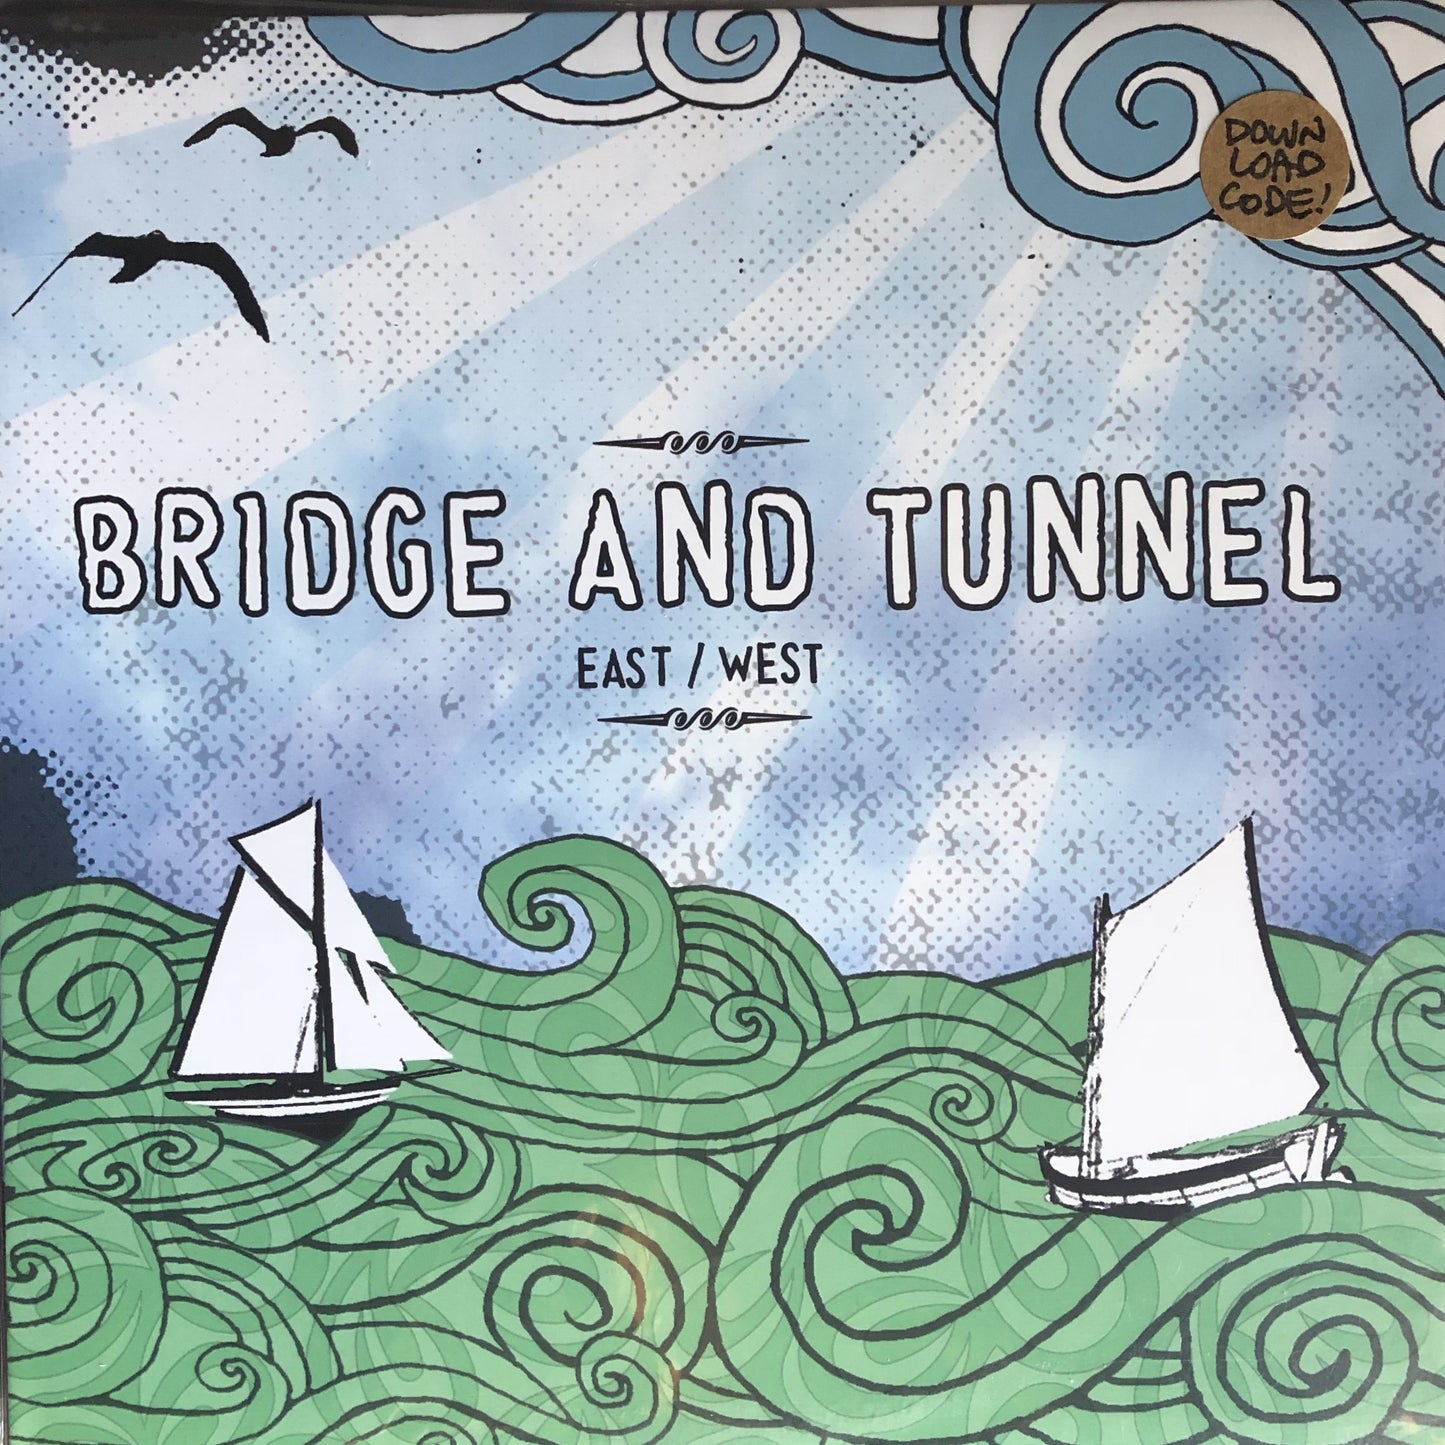 BRIDGE AND TUNNEL "East/West"